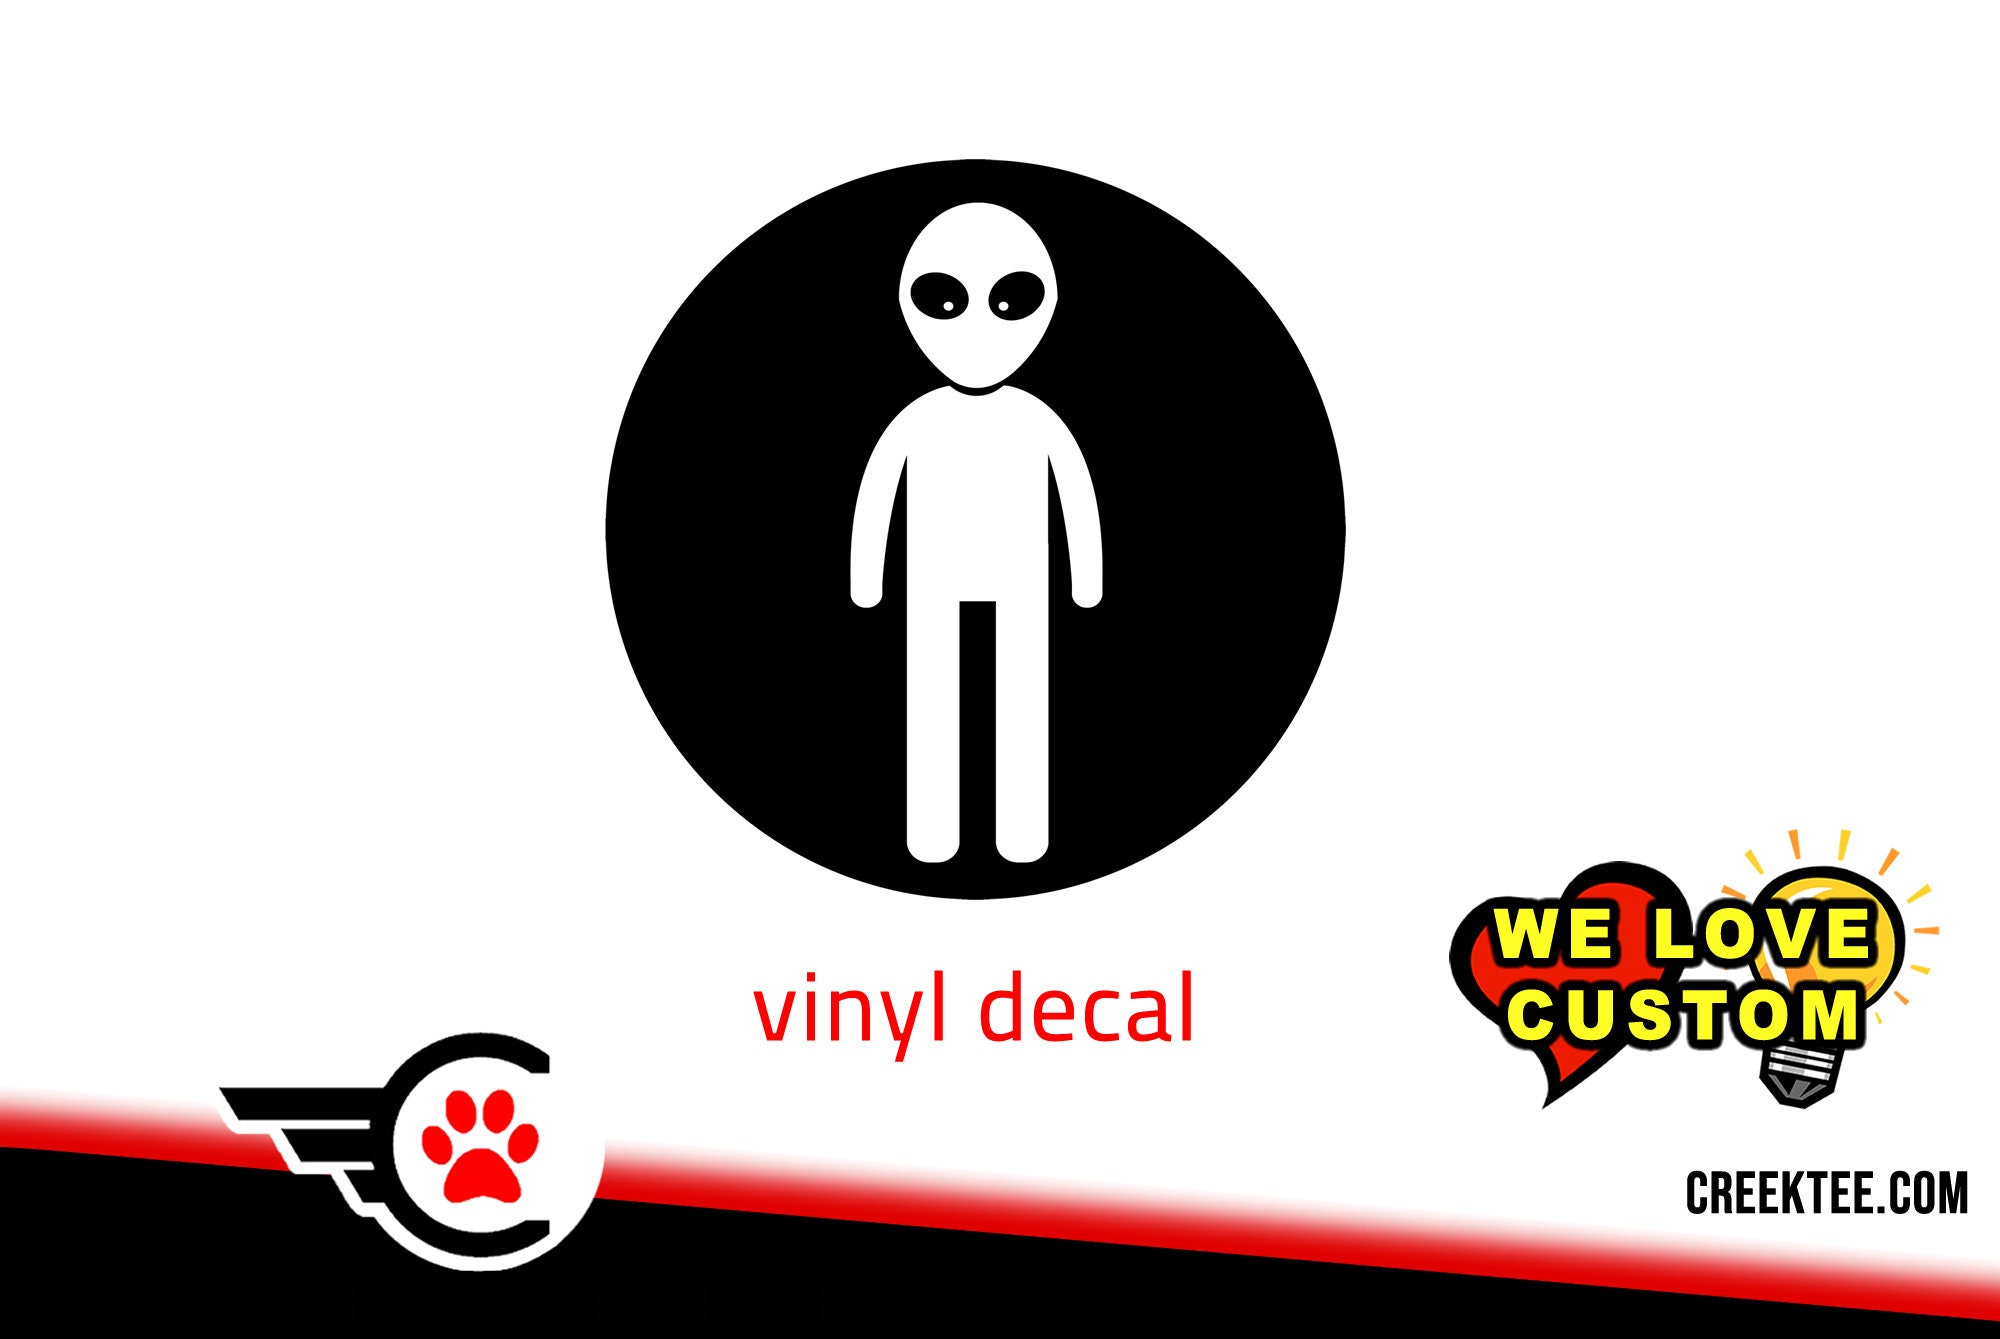 Alien Color Vinyl Decal Various Sizes and Colors Die Cut Vinyl Decal also in Cool Chrome Colors!